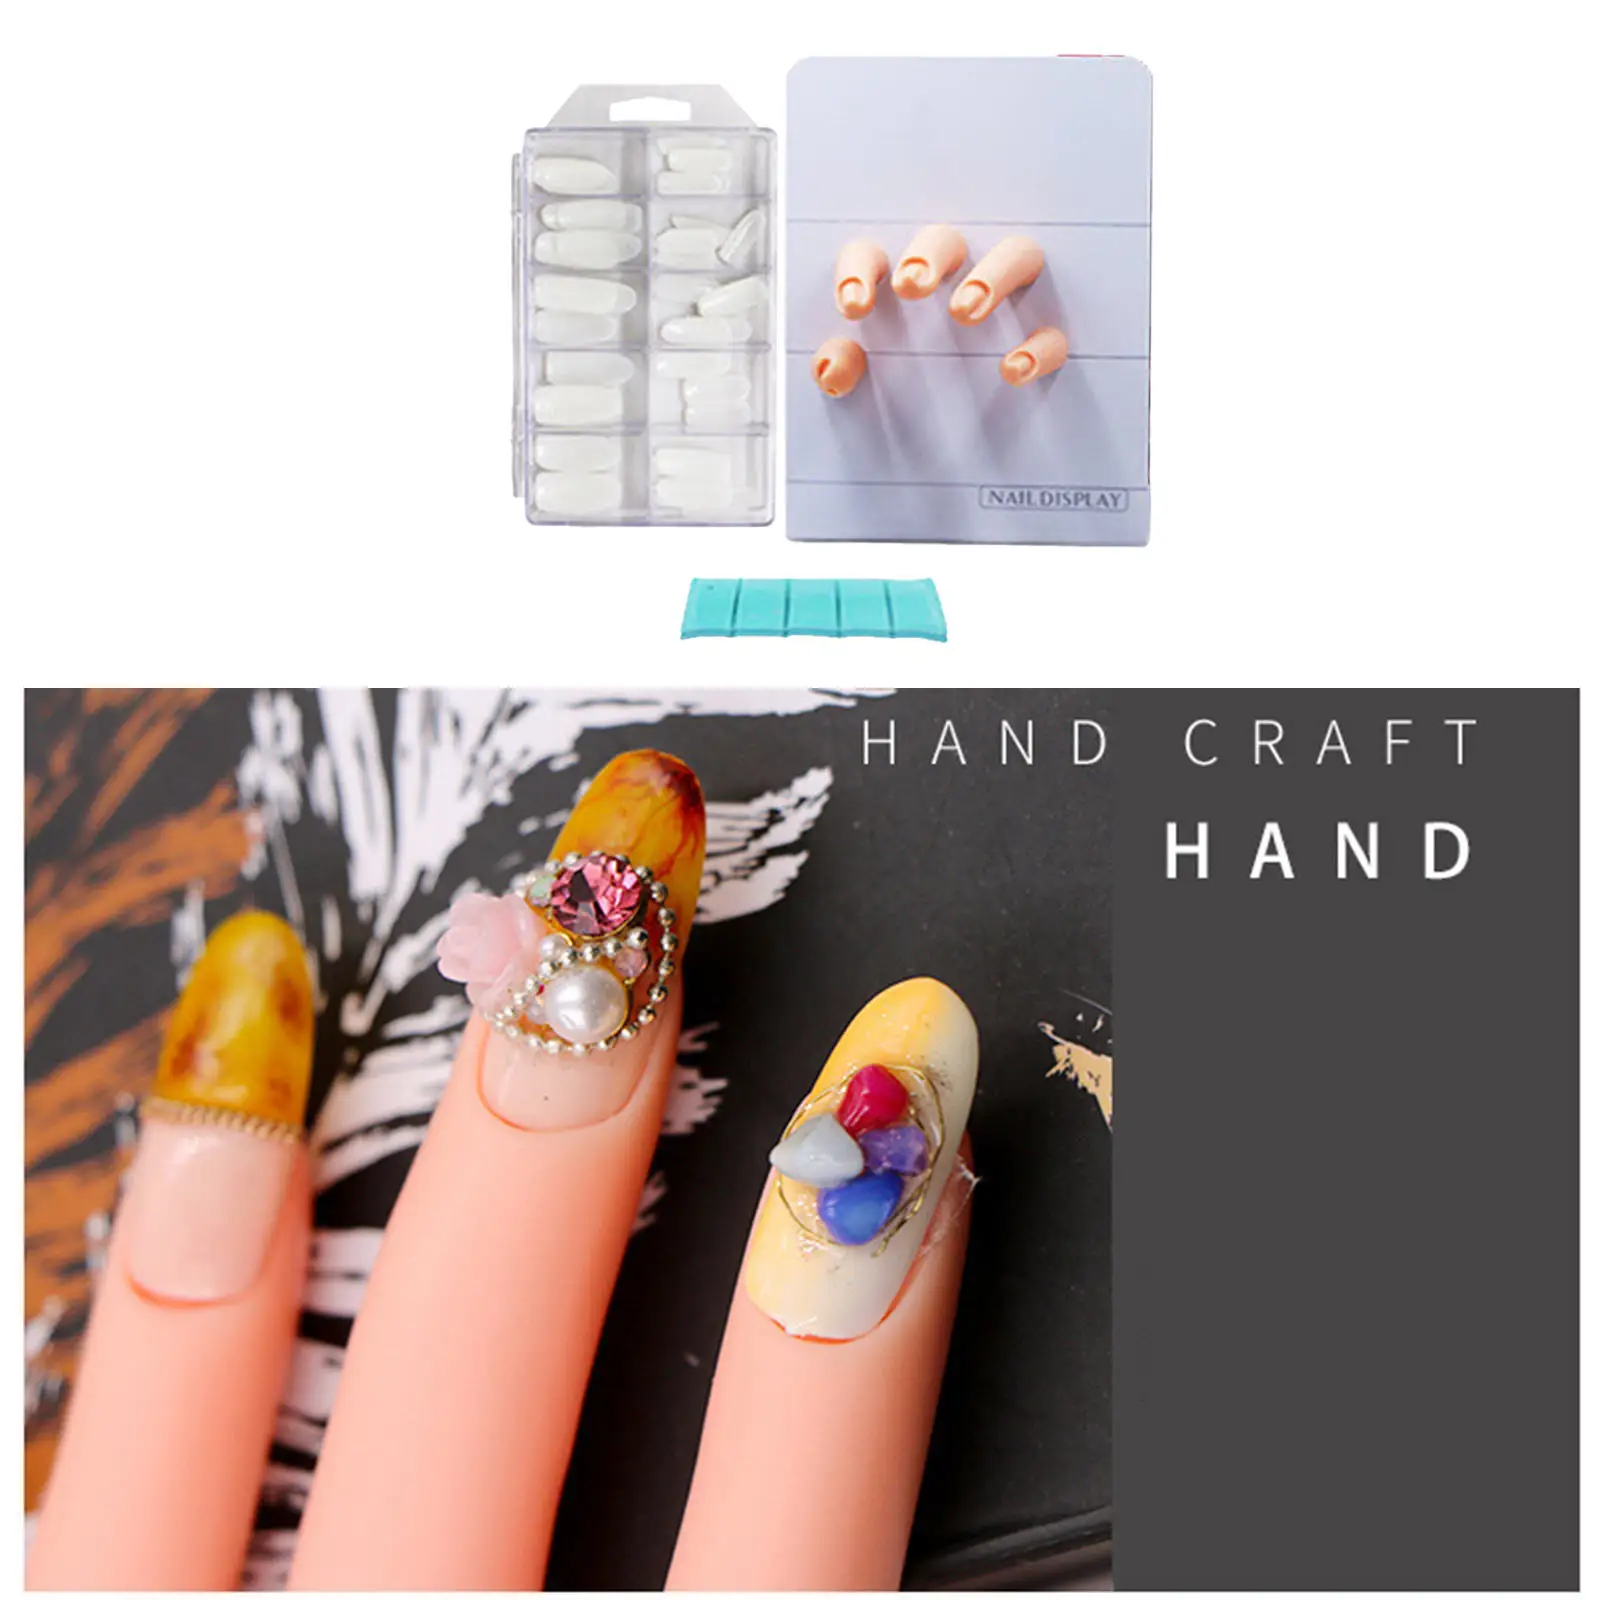 Movable Nail Art Training Tool Decoration Design Learning Silicone Manicure Supply Magnetic Plastic Training Hand for Beginners